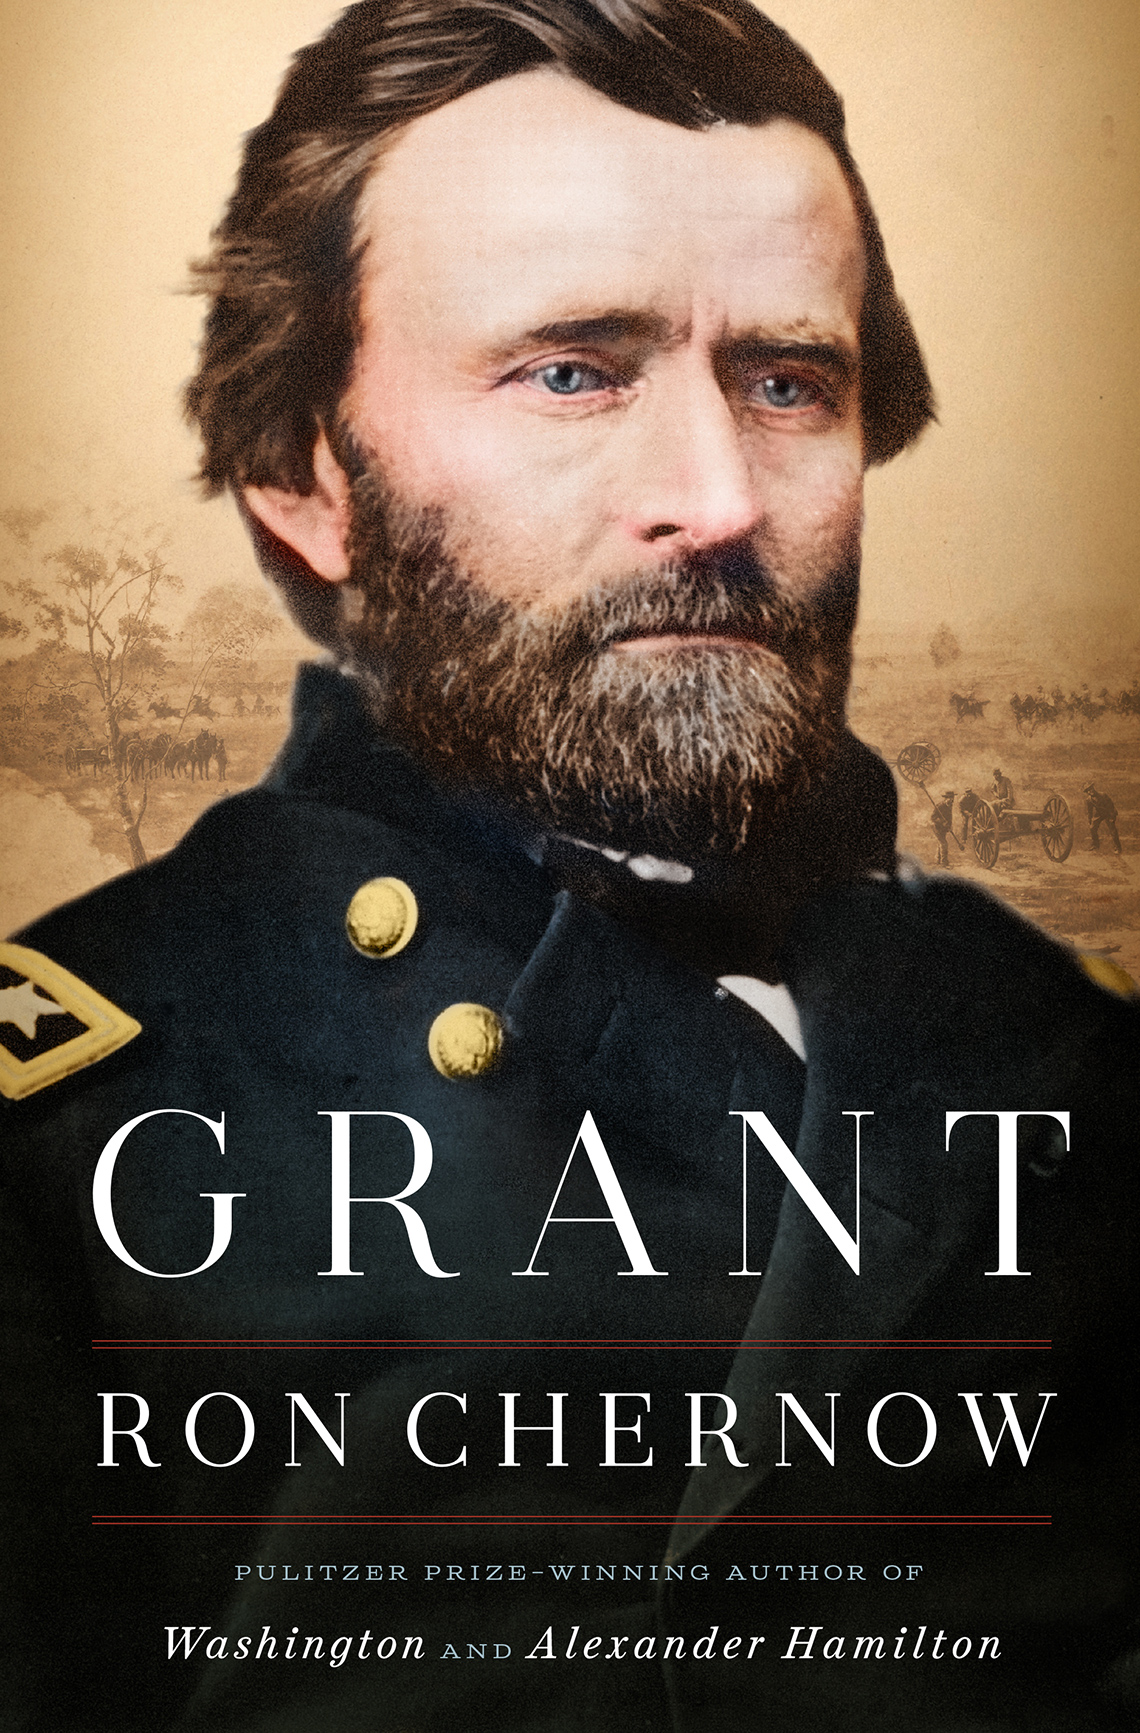 'Grant' by Ron Chernow